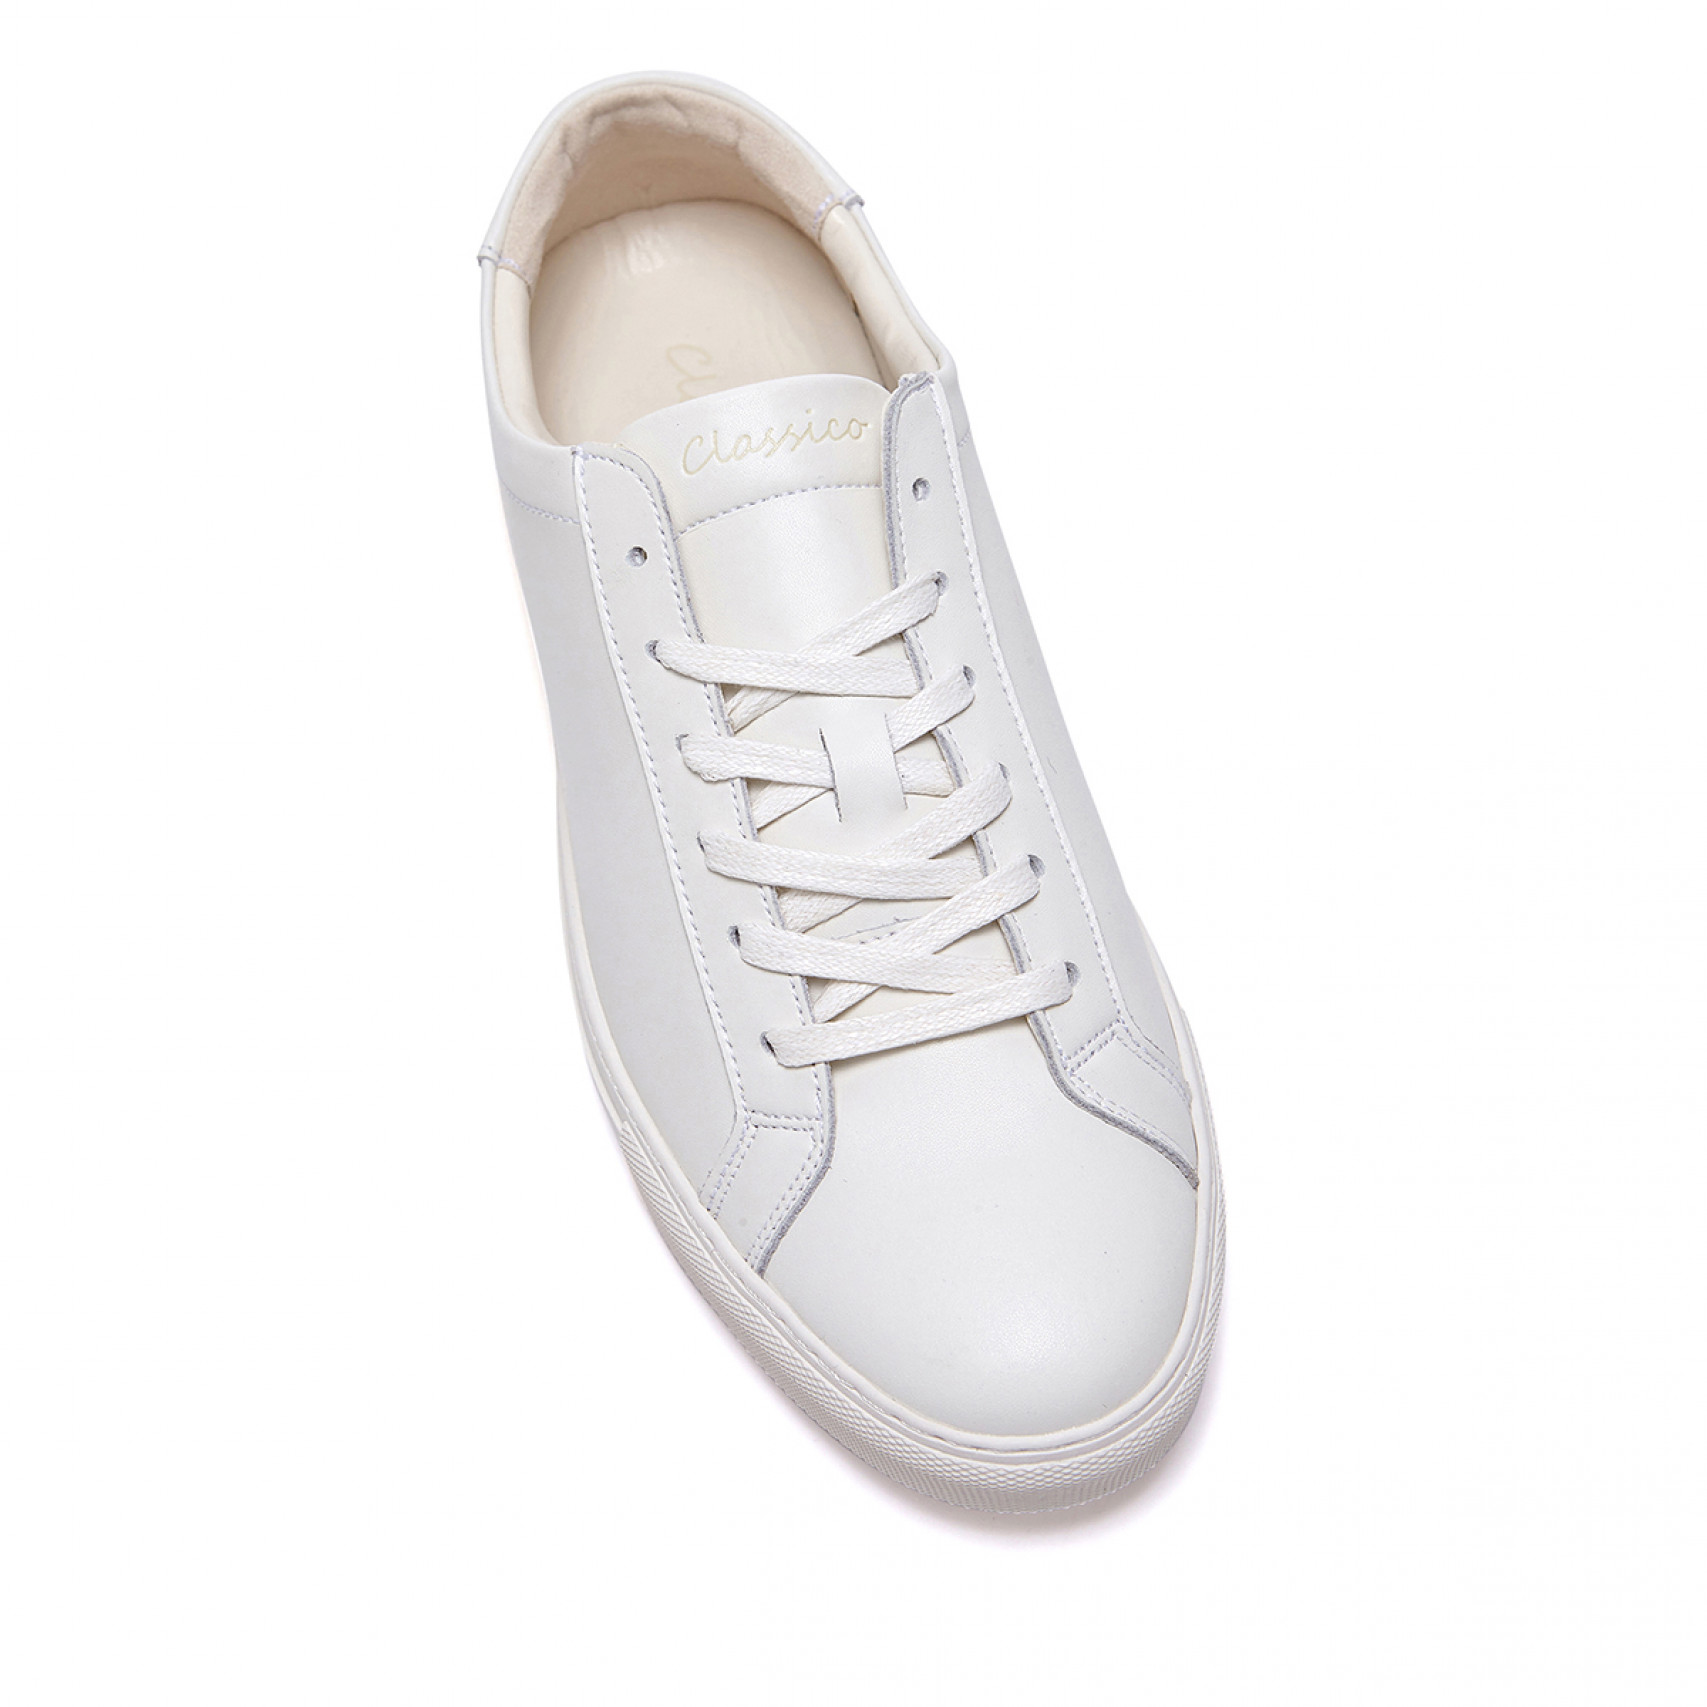 Classic Leather Sneakers Ver2